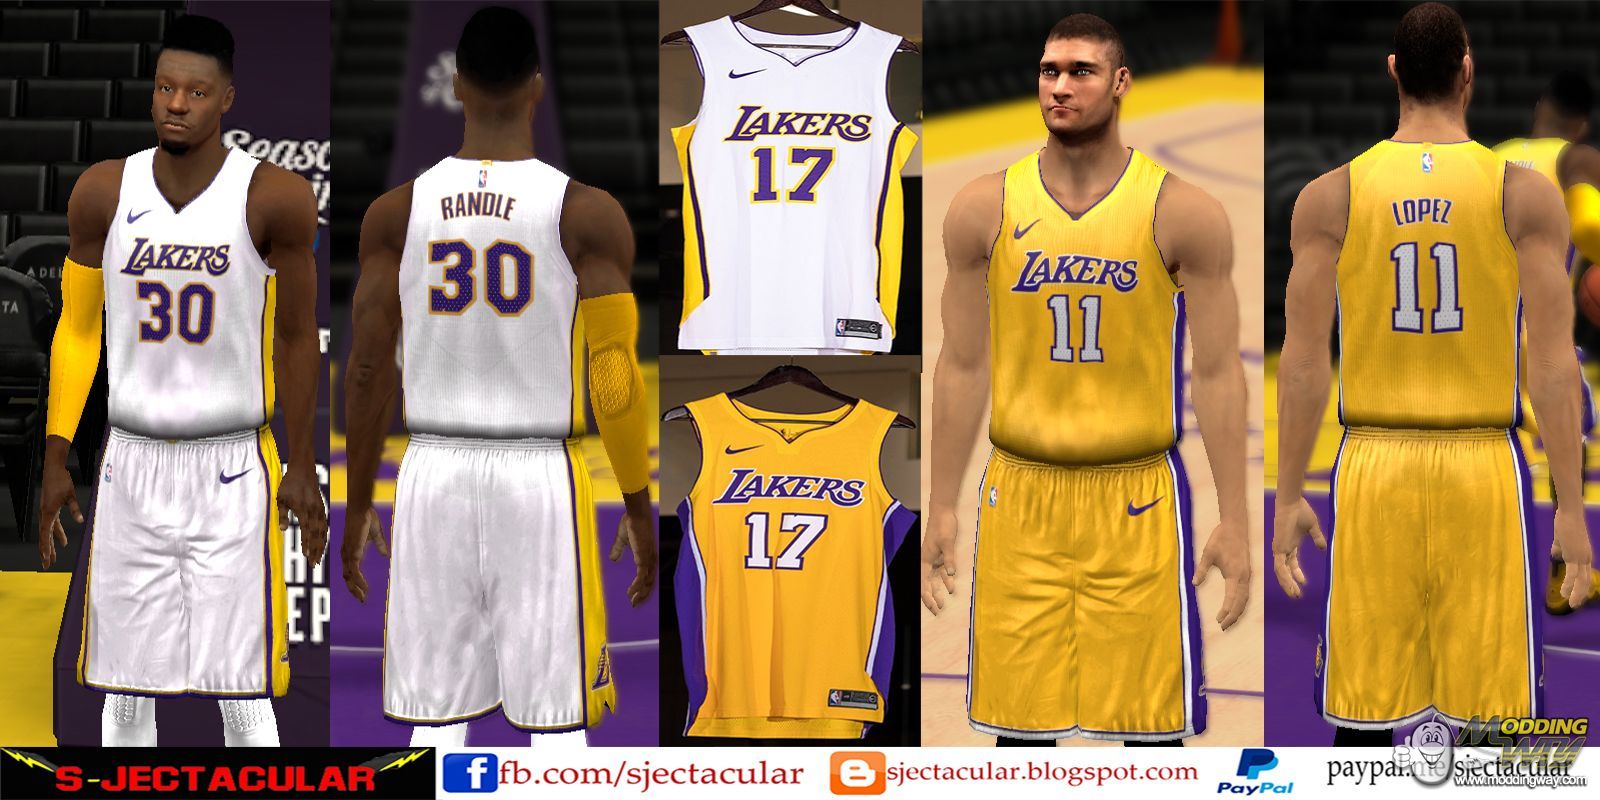 lakers jersey 2018